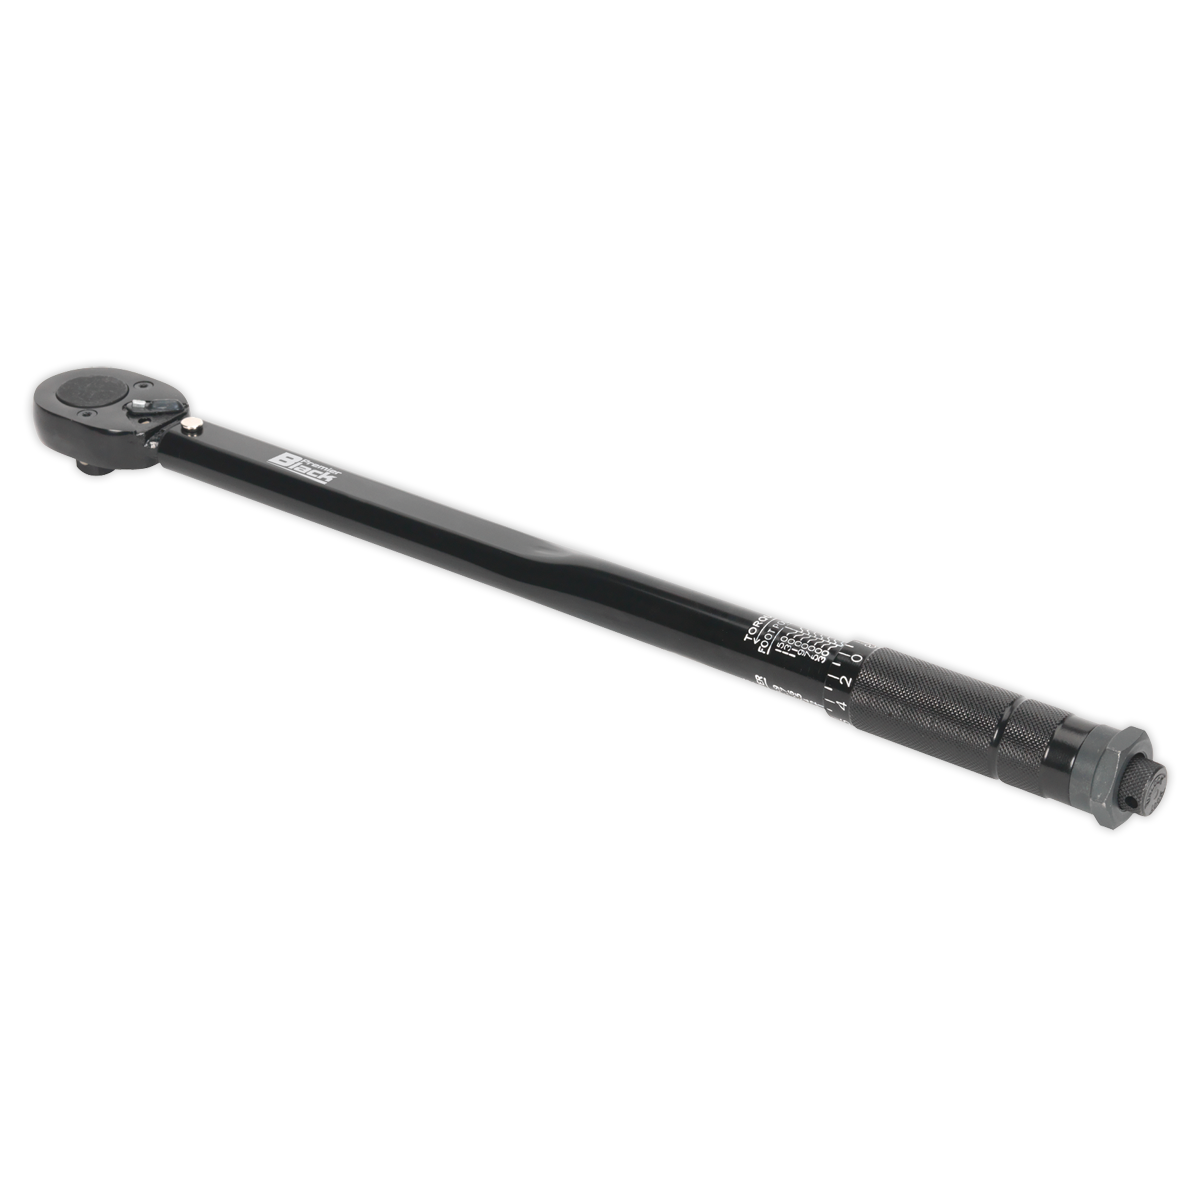 Sealey Micrometer Torque Wrench 1/2"Sq Drive Calibrated Black Series